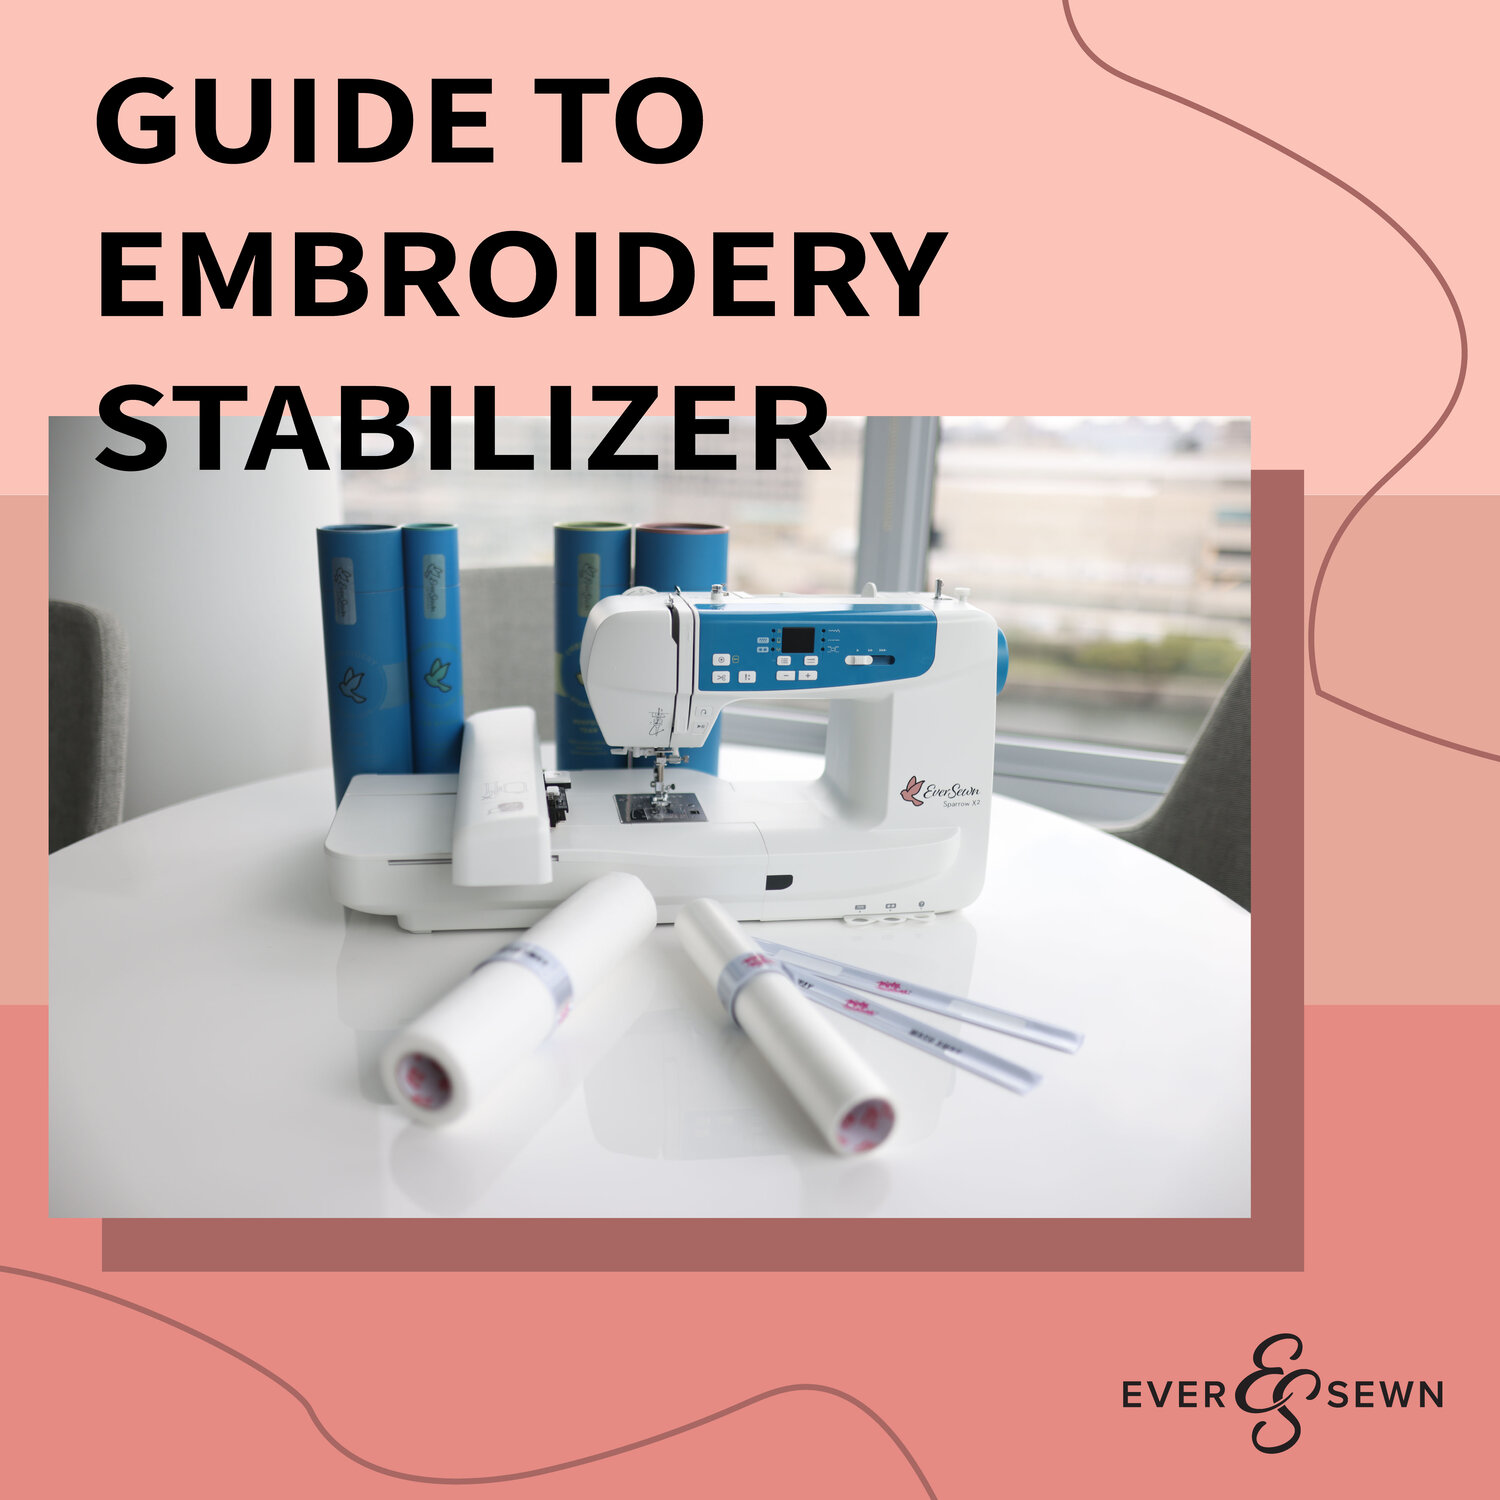 Guide for Using an Embroidery Stabilizer